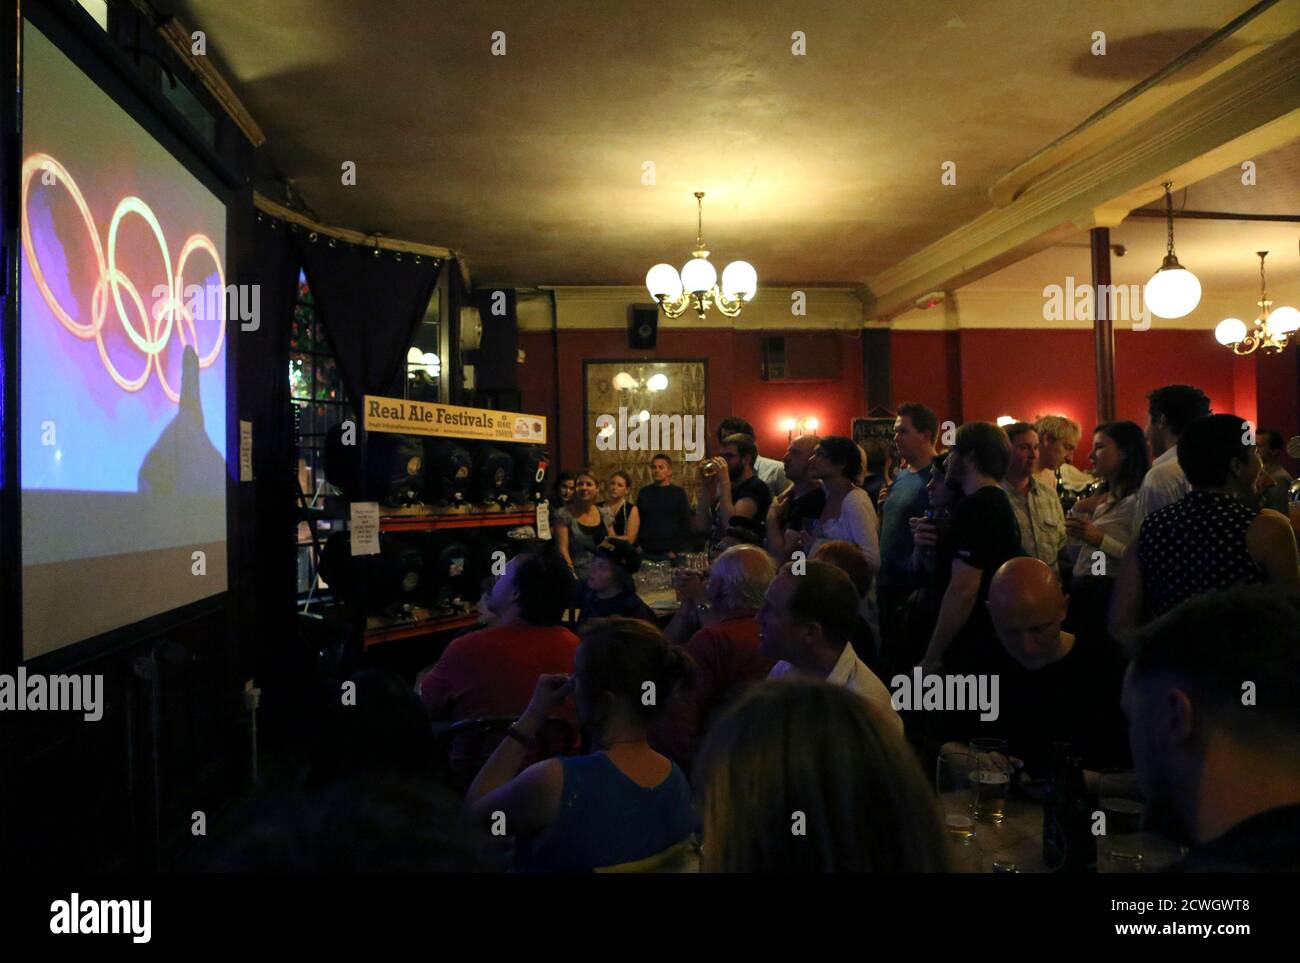 People watch the opening ceremony of the London 2012 Olympic Games at a pub in London July 27, 2012.  REUTERS/Sergio Moraes (BRITAIN - Tags: SPORT OLYMPICS SOCIETY) Stock Photo